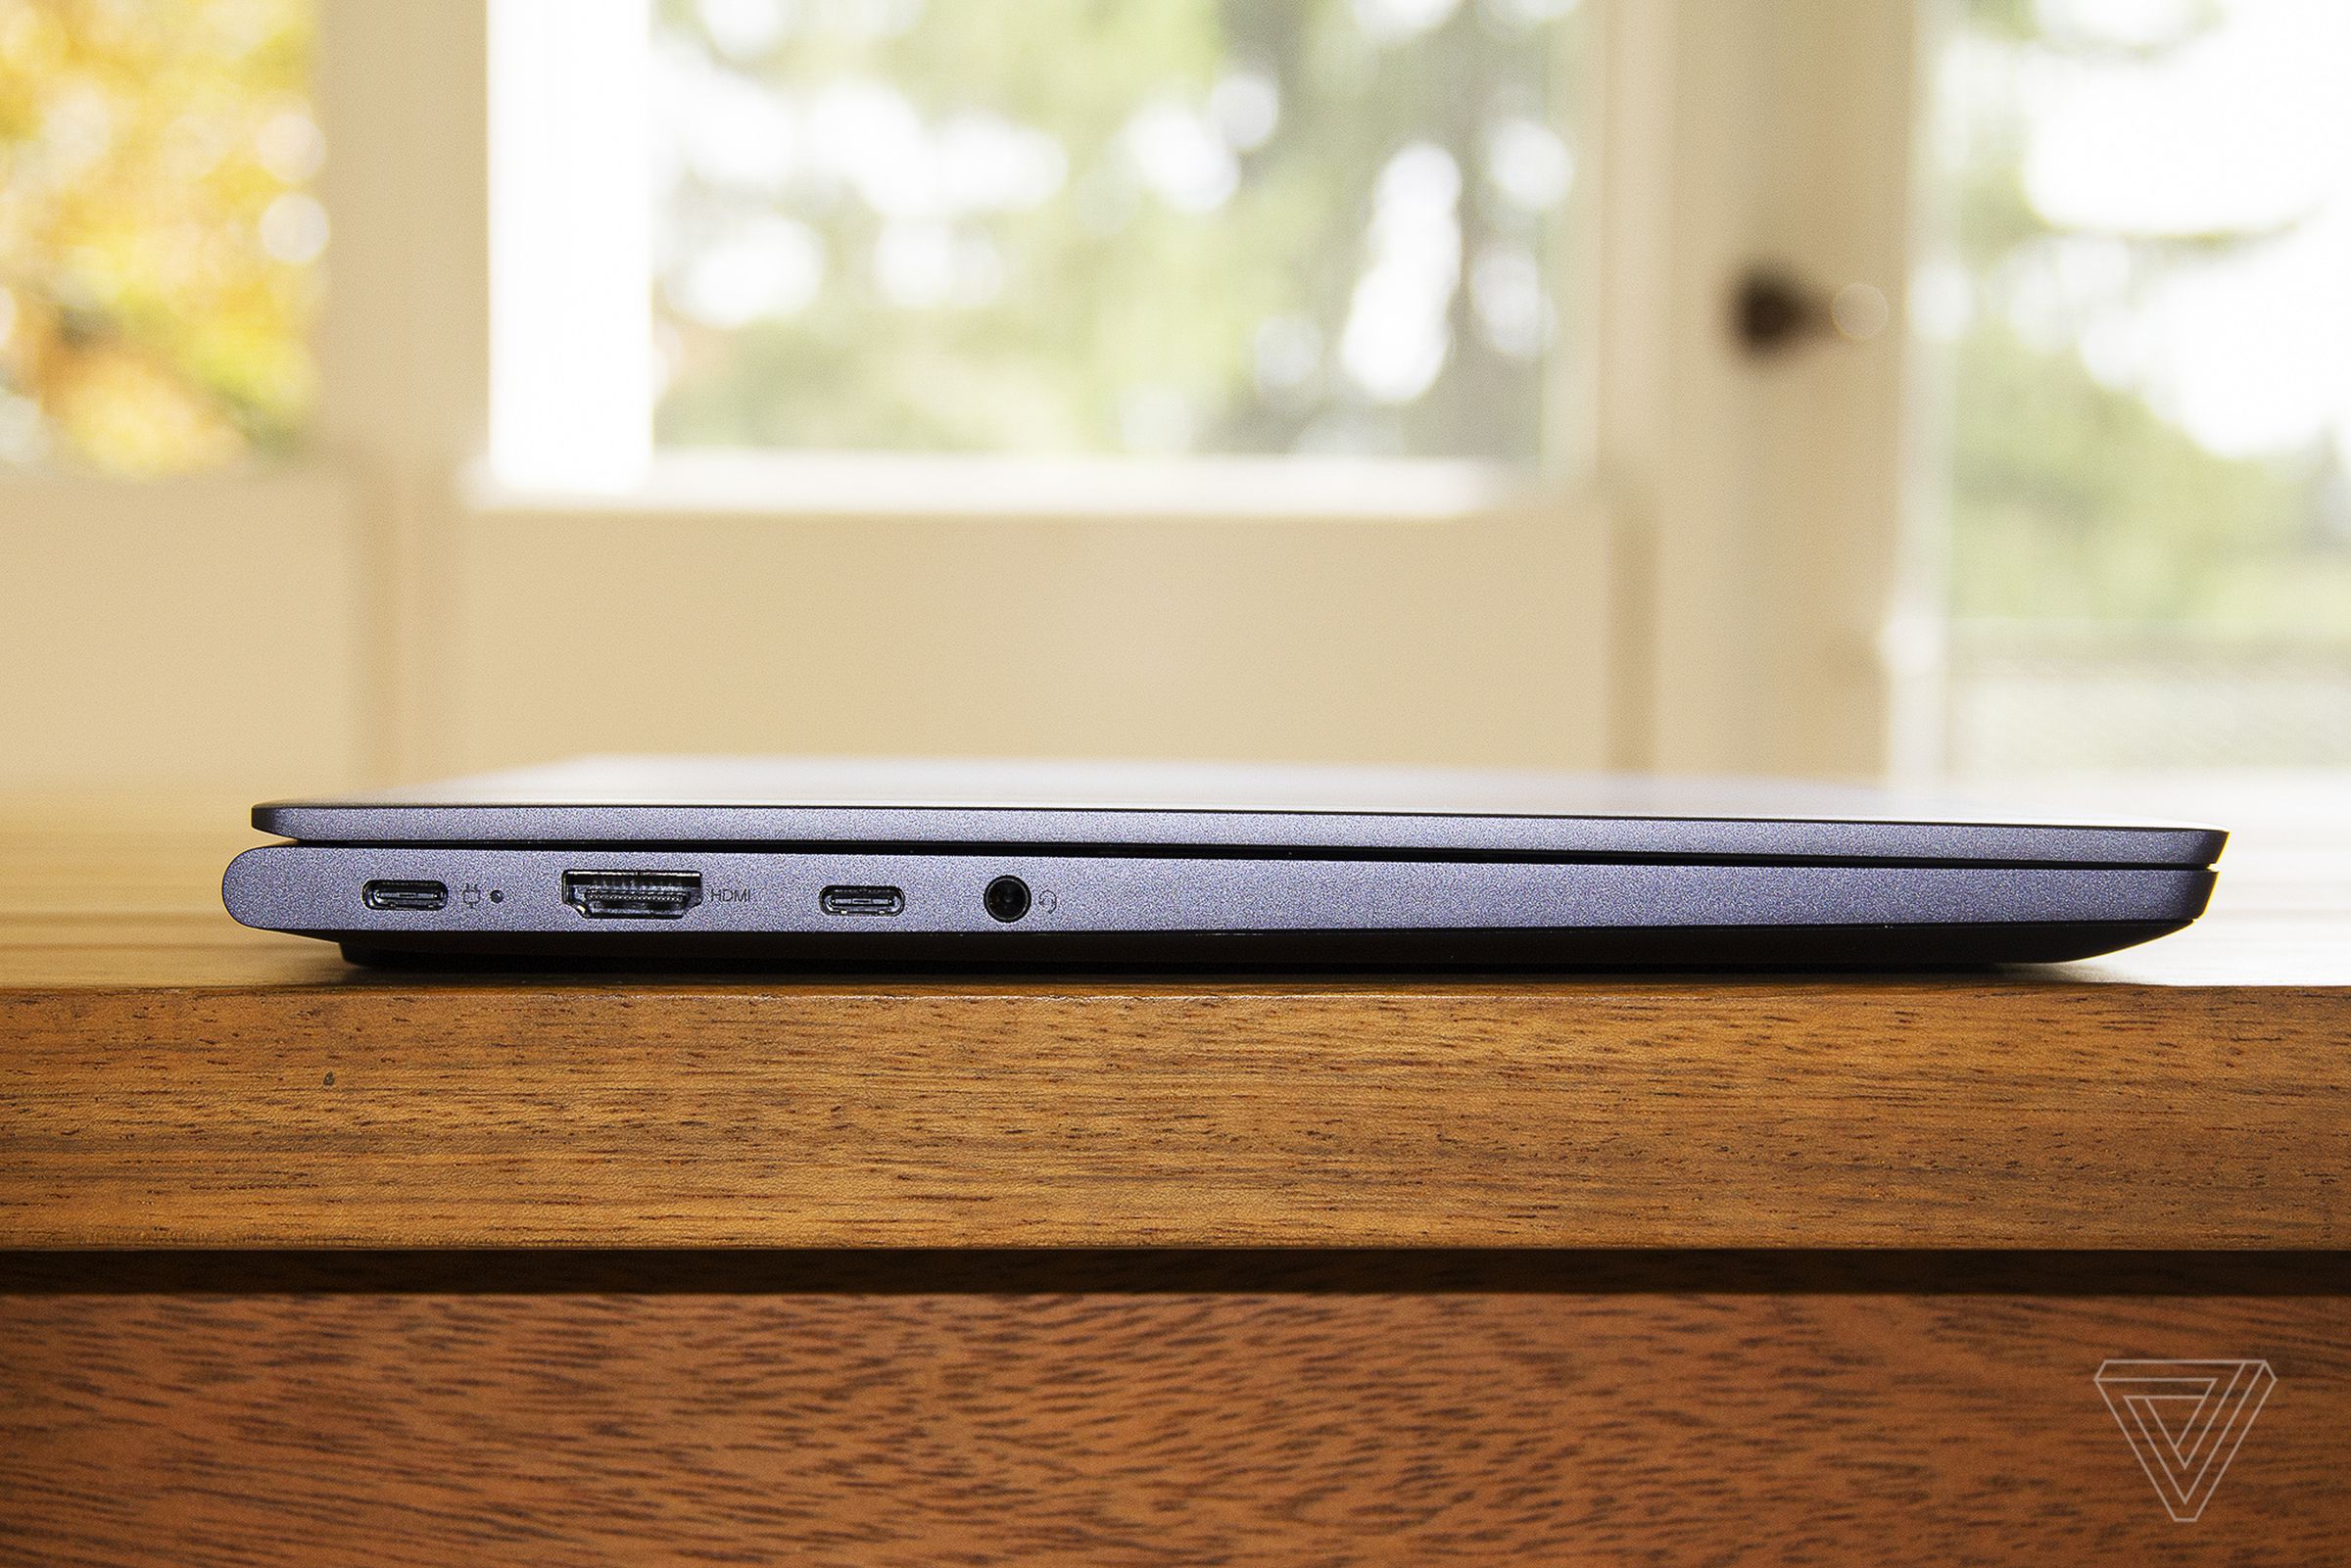 The Lenovo IdeaPad Slim 7, closed from the side.